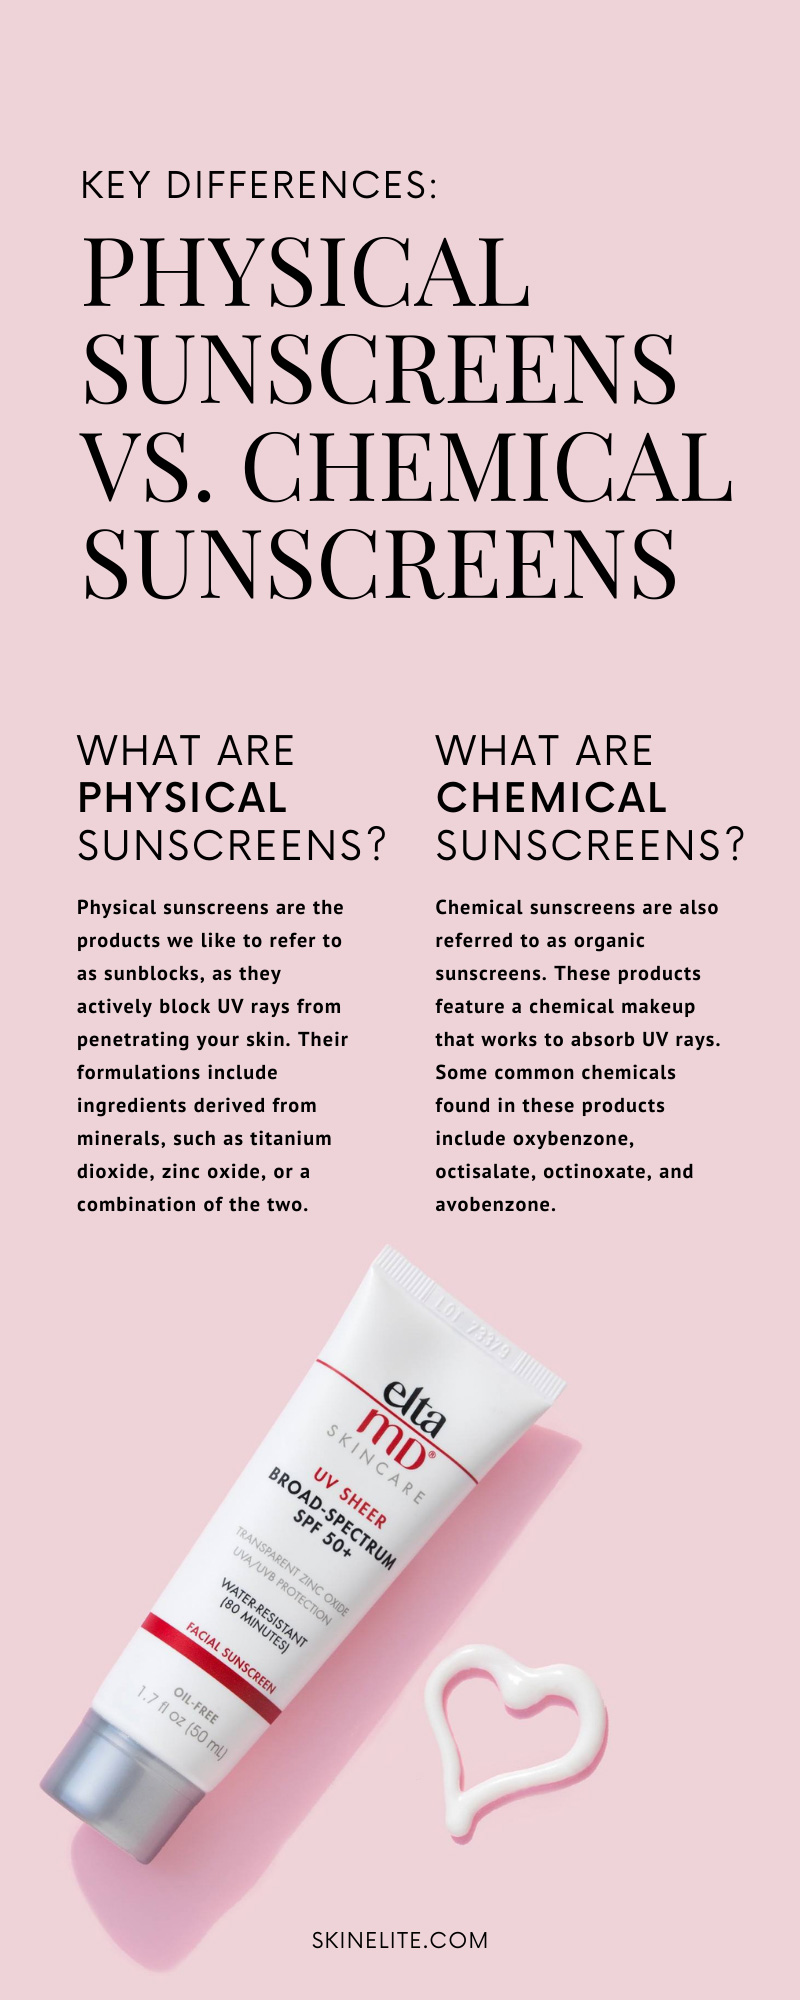 Key Differences: Physical Sunscreens vs. Chemical Sunscreens